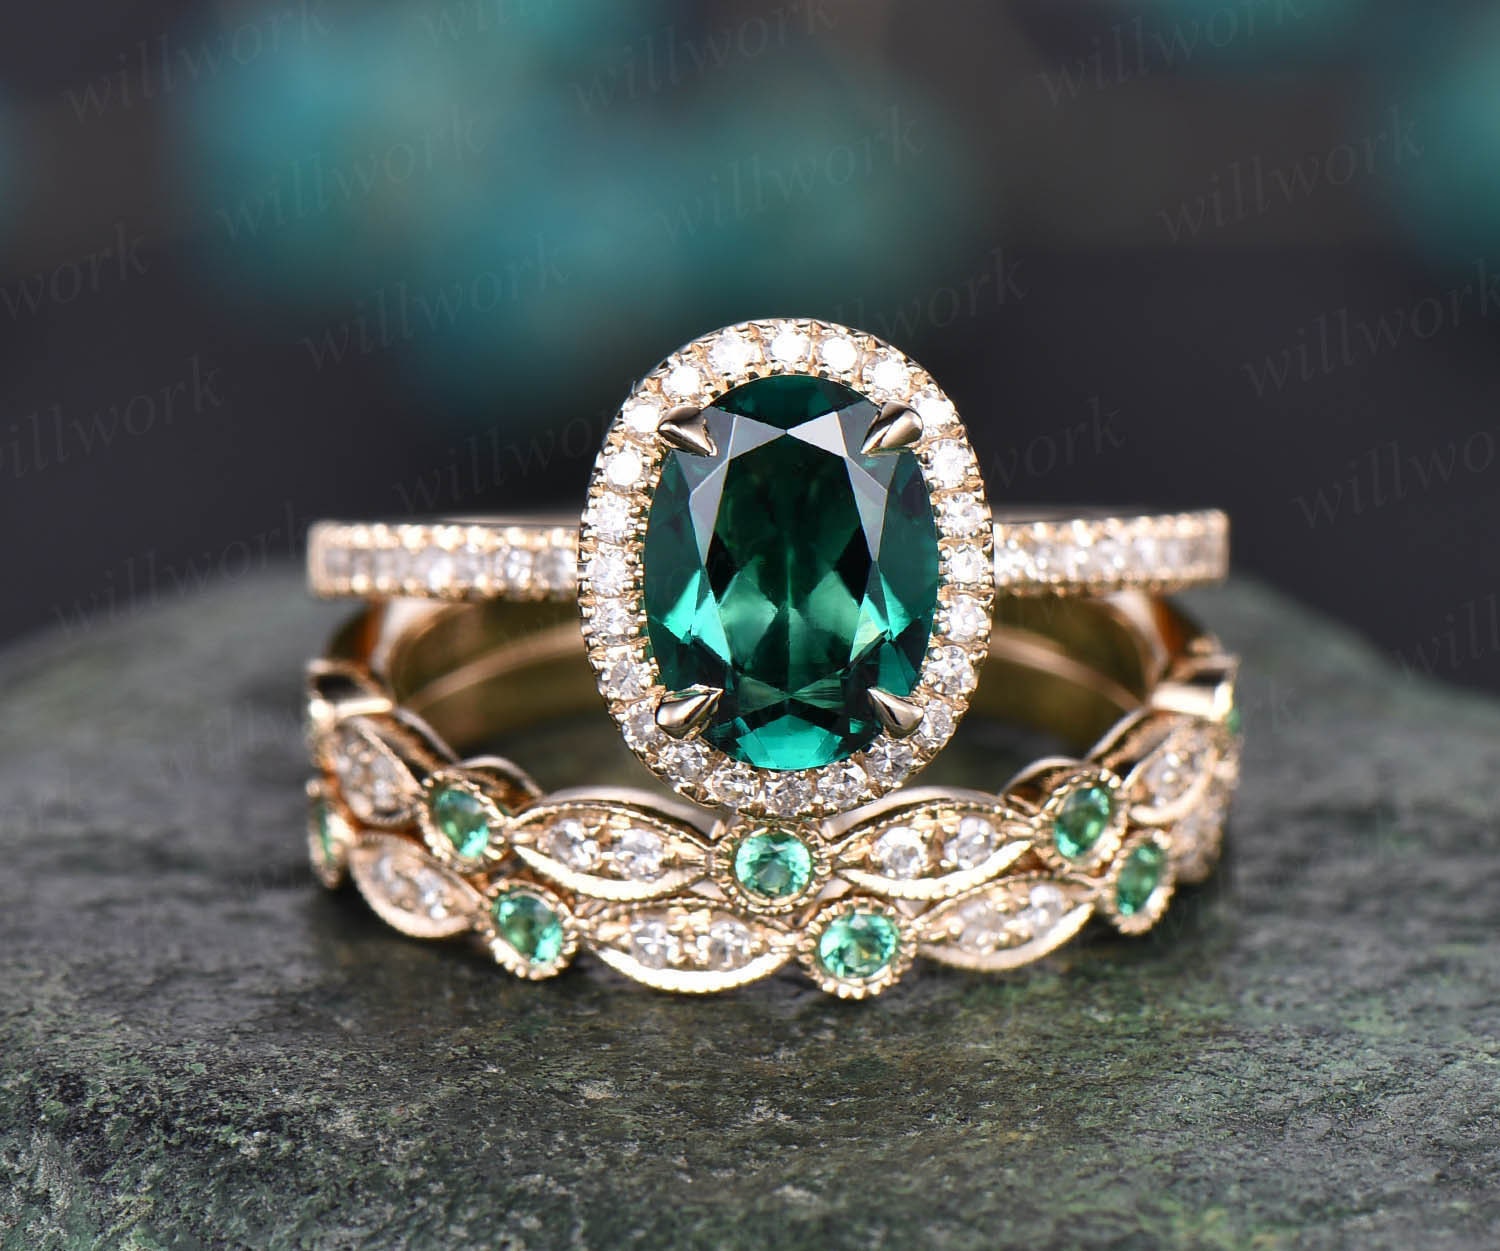 Oval Emerald Ring Stack Gold Vintage Halo Diamond Ring Curved Band | Green  gemstone engagement rings, Emerald engagement ring set, Diamond alternative  engagement ring